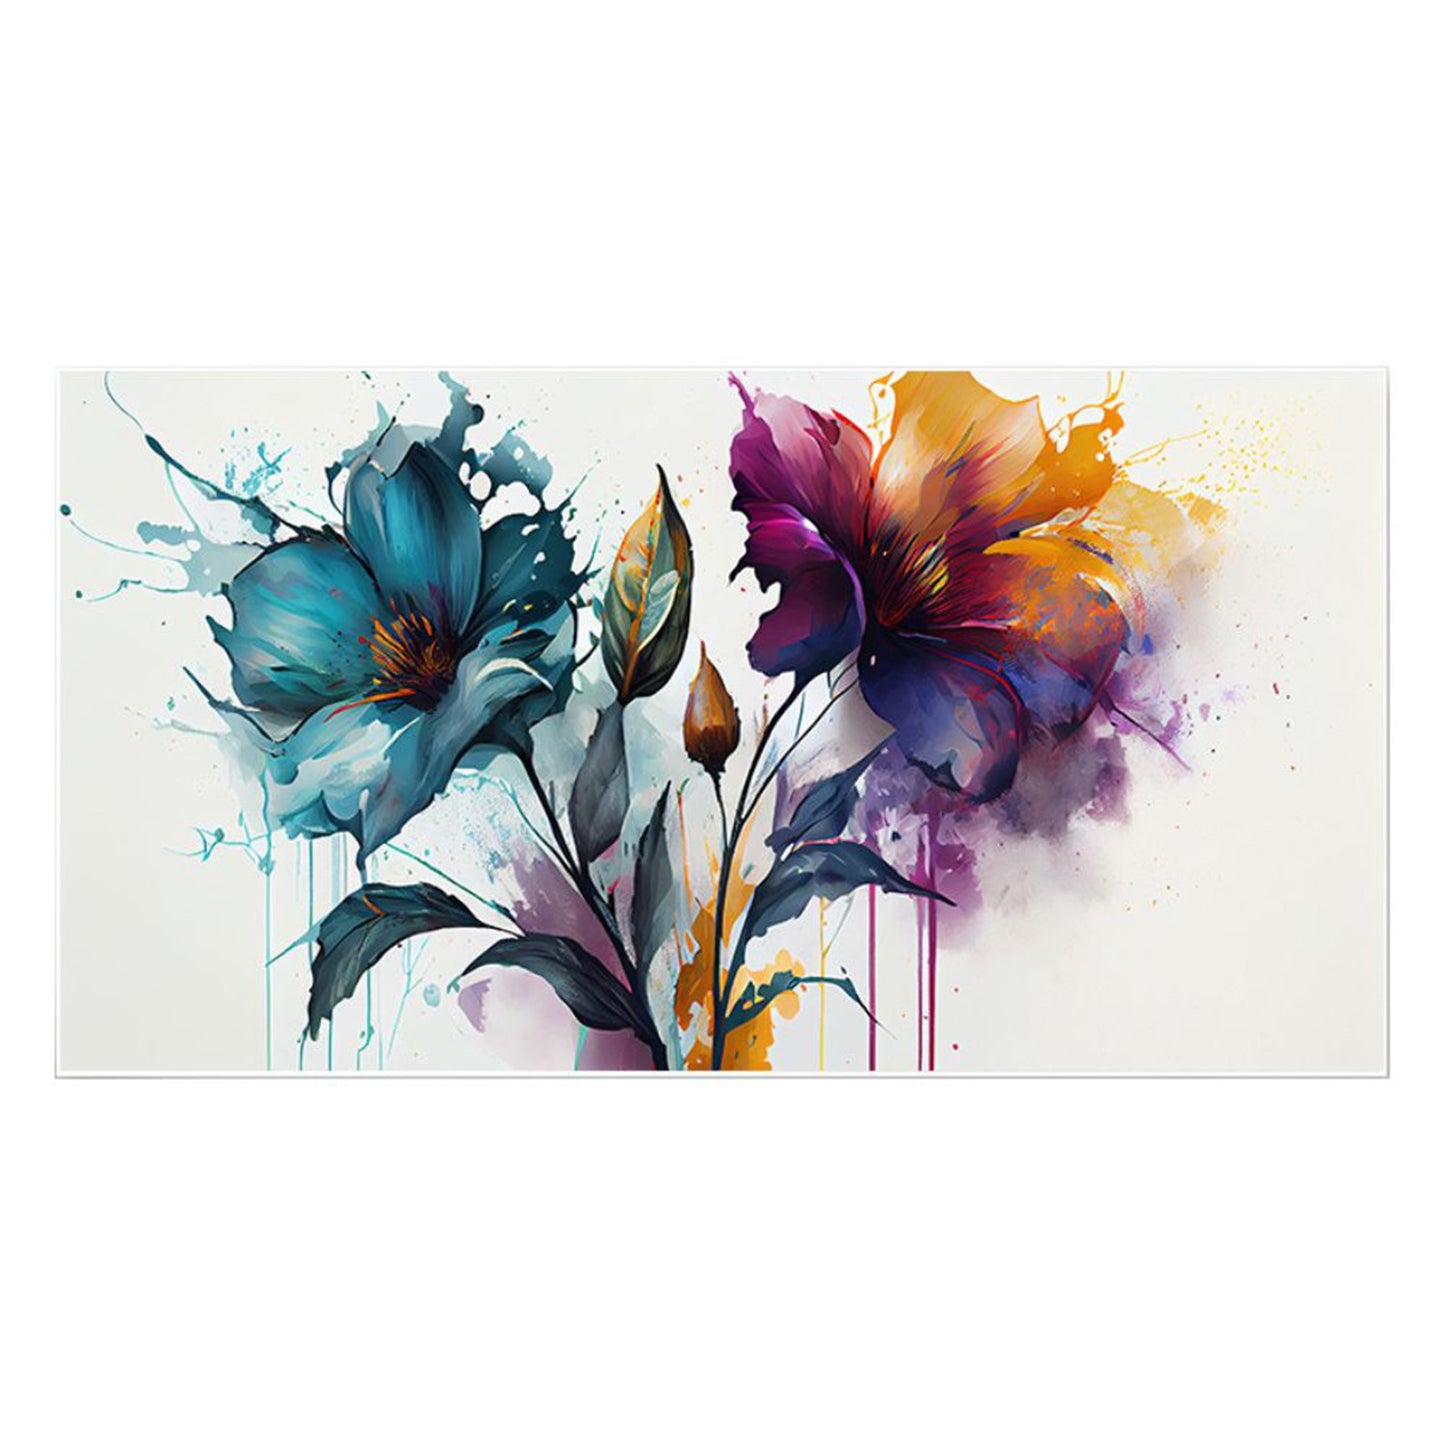 Dynamic Floral Splashes: Vibrant Art Wall Painting